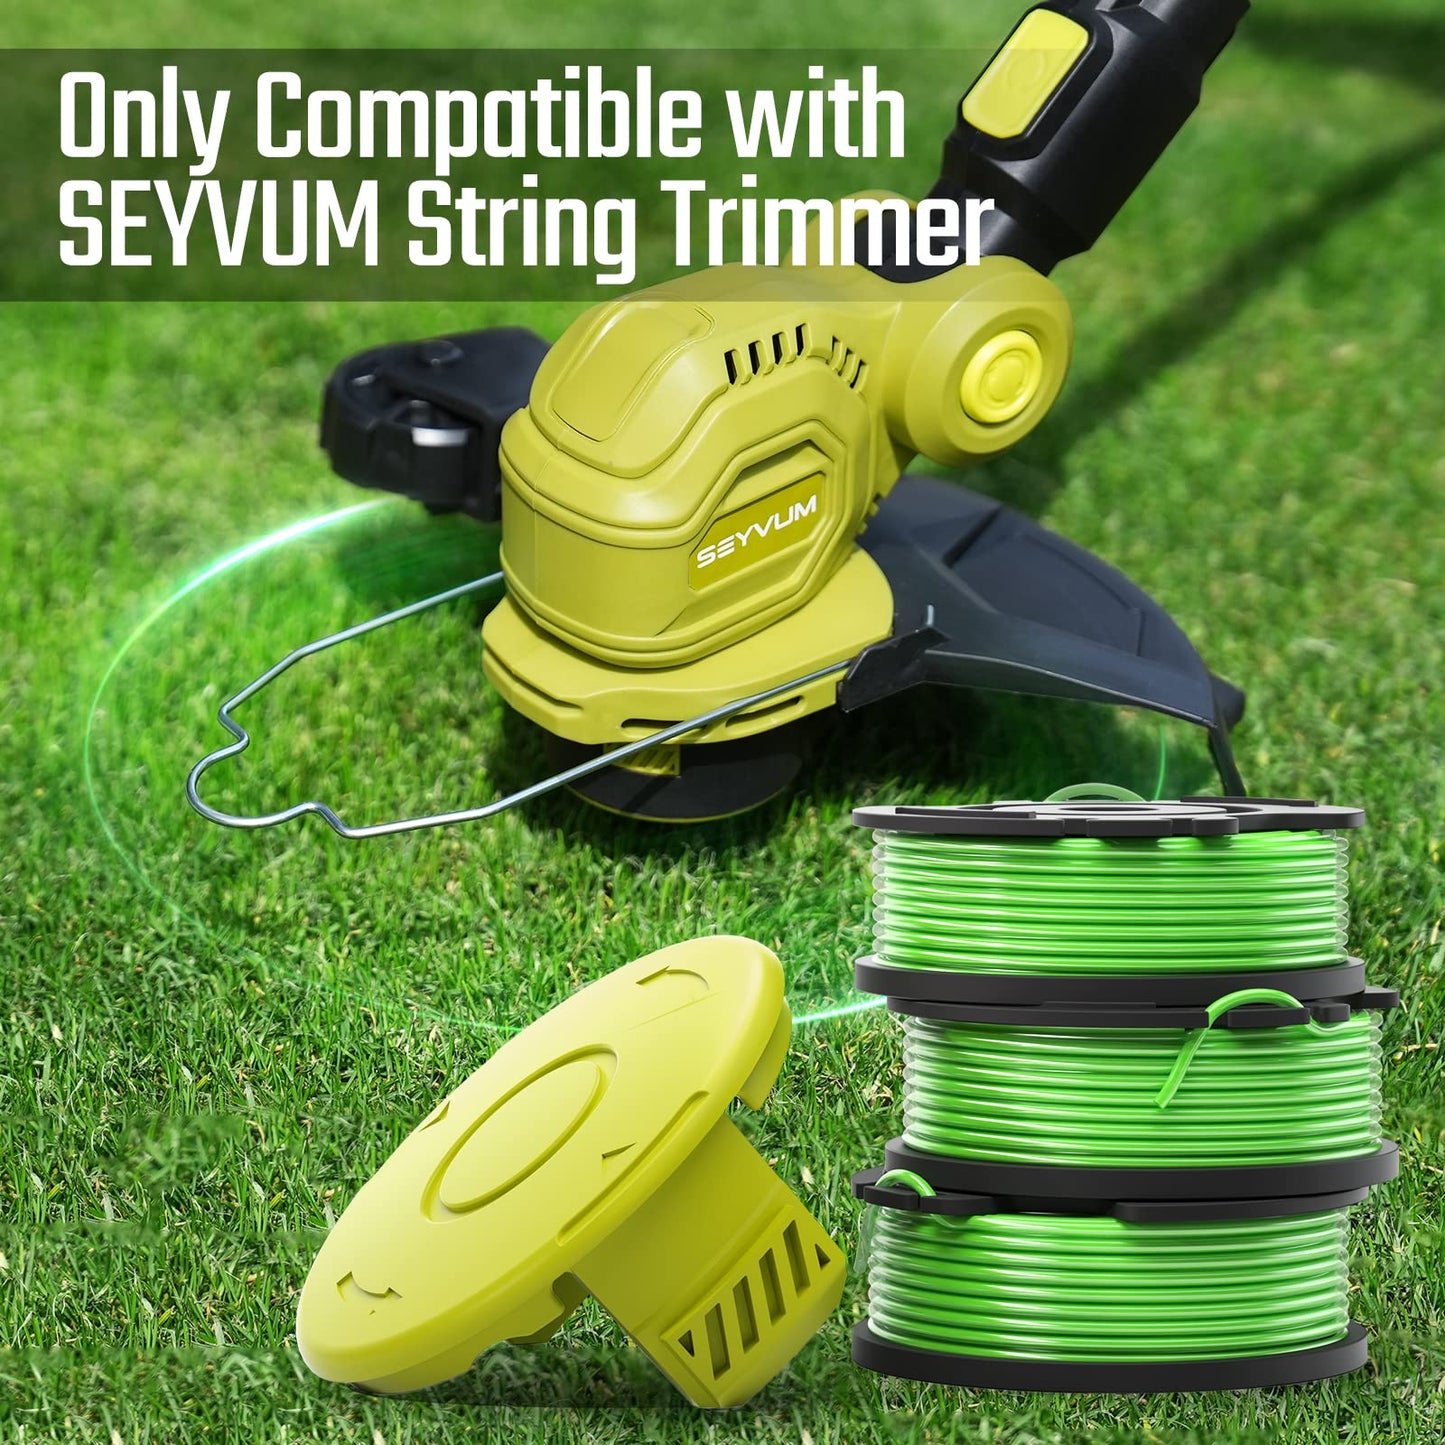 SEYVUM Trimmer Spool Line, Edger Spool Line, 0.065-inch Weed Eater Spool, 3-Pack 16 ft Weed Wacker Lines, Replacement Cap Included